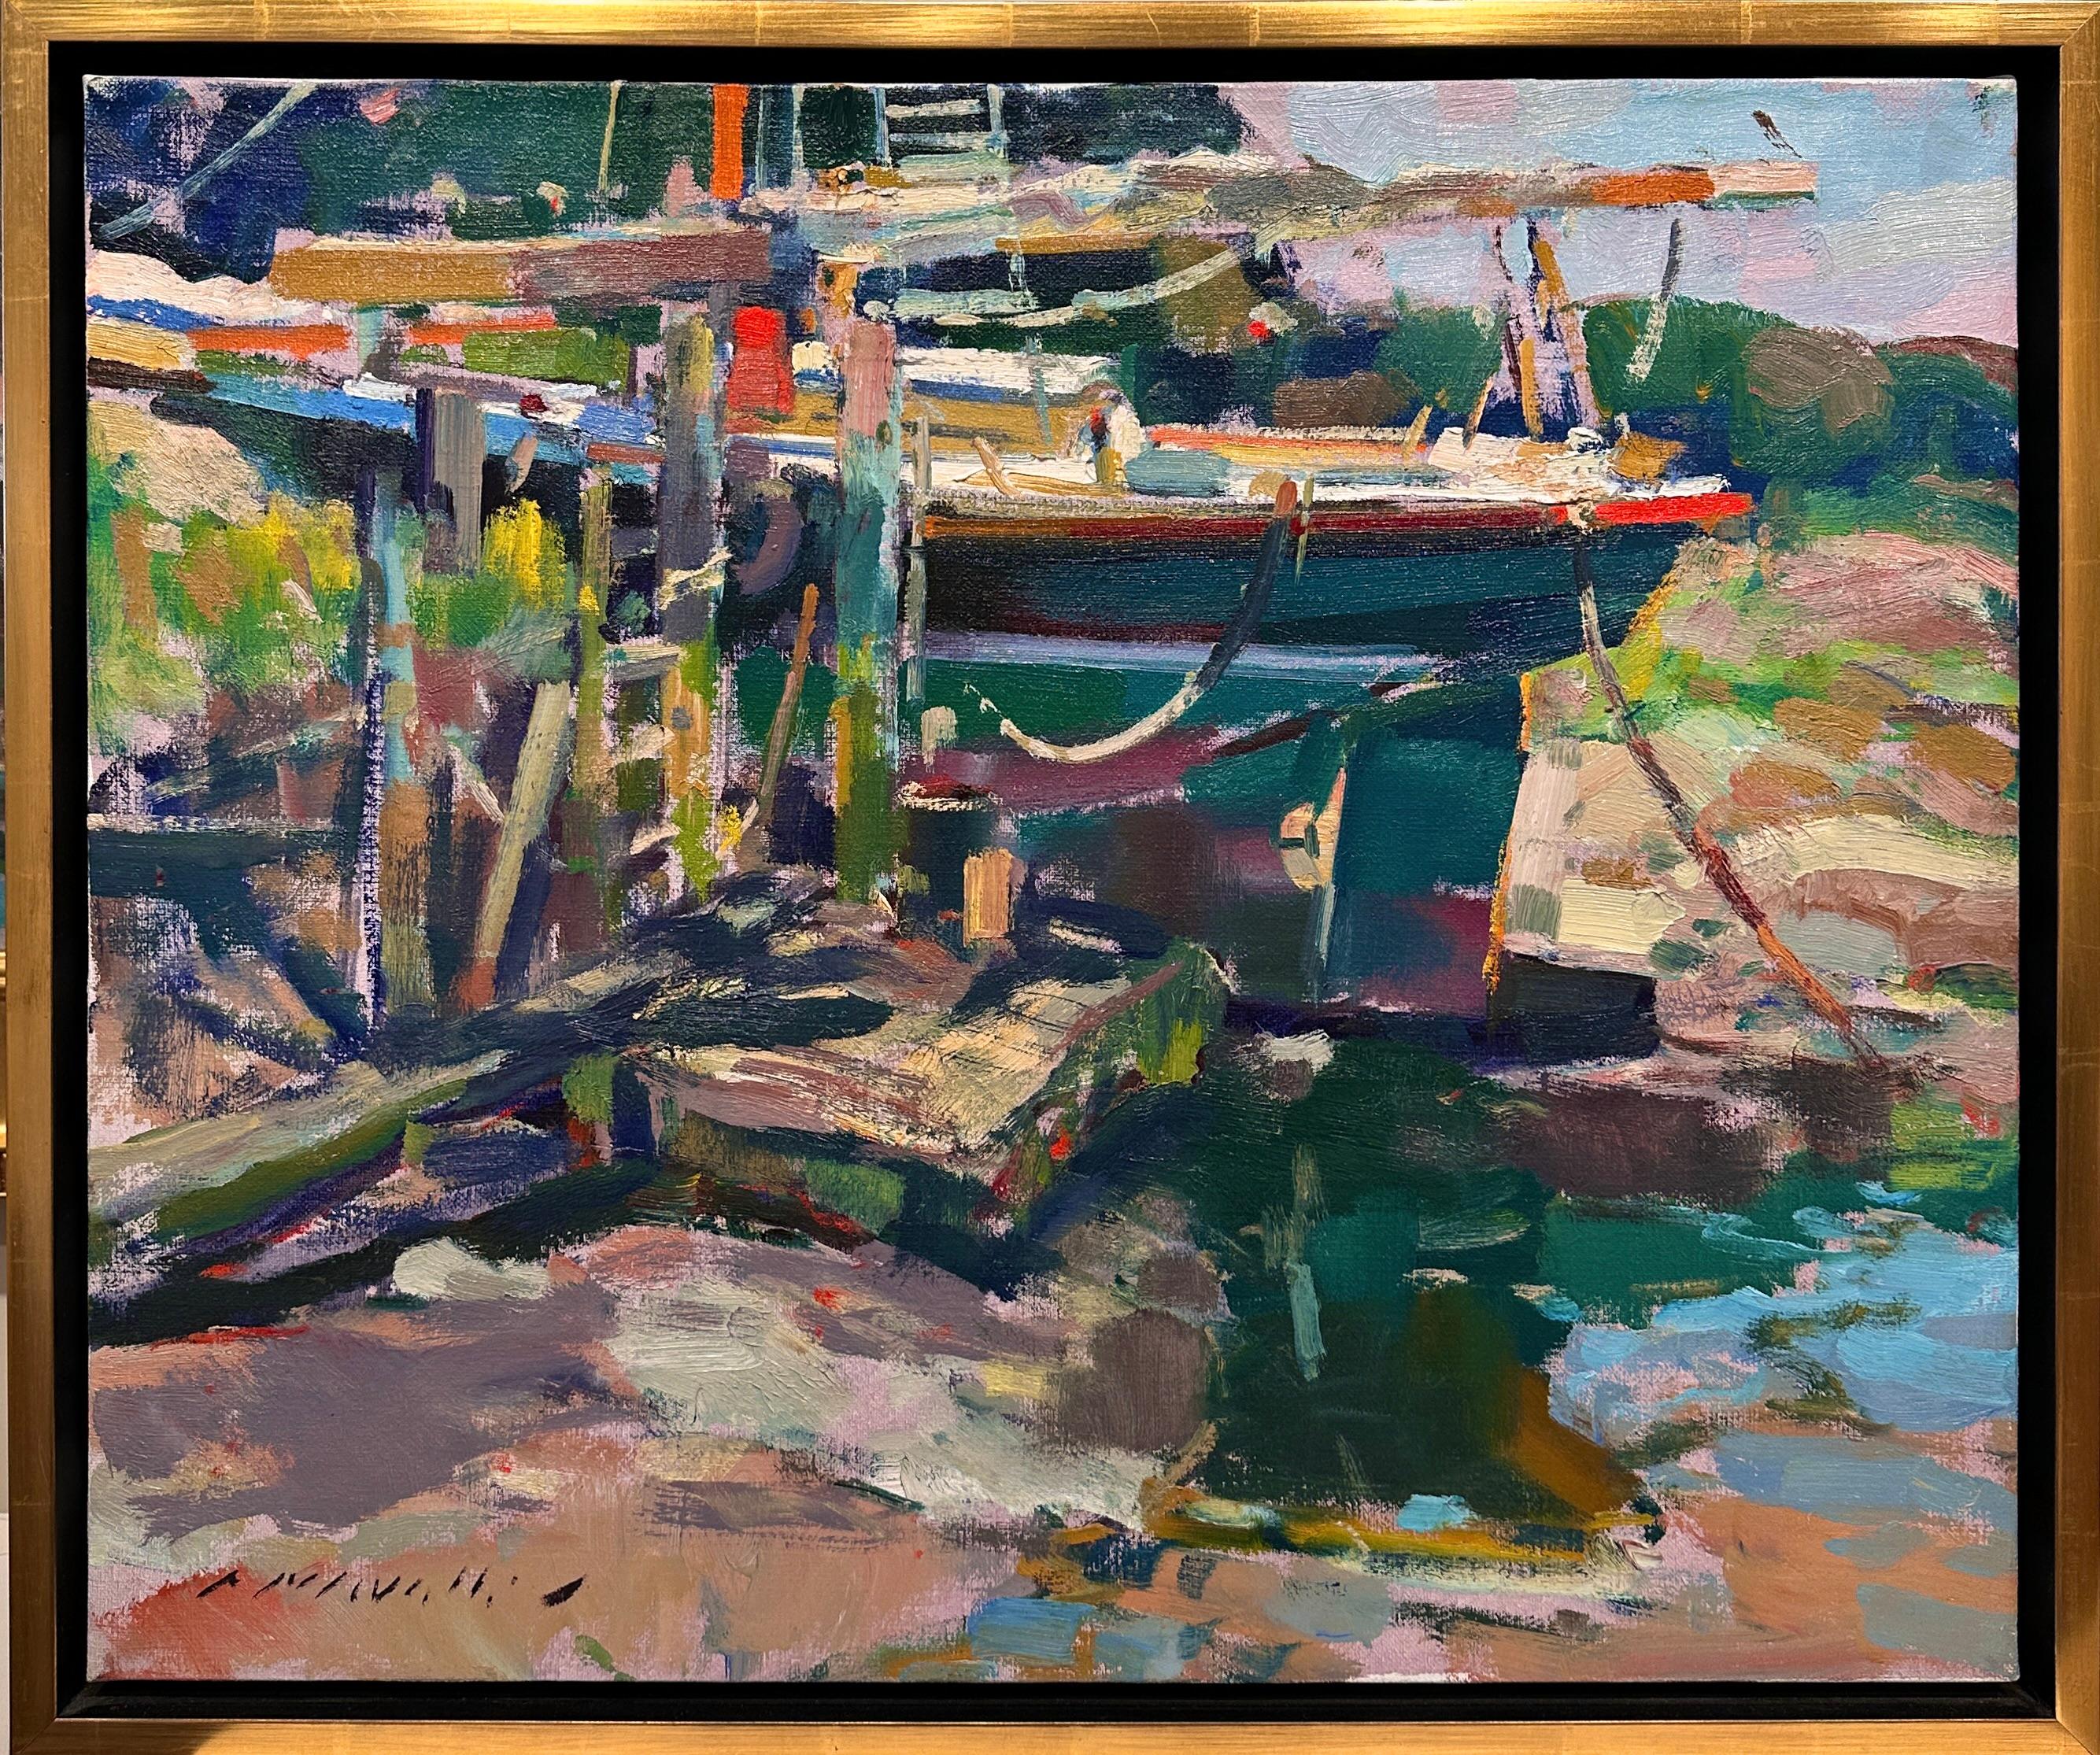 In the Harbor done by artist Charles Movalli (1945-2016) 1